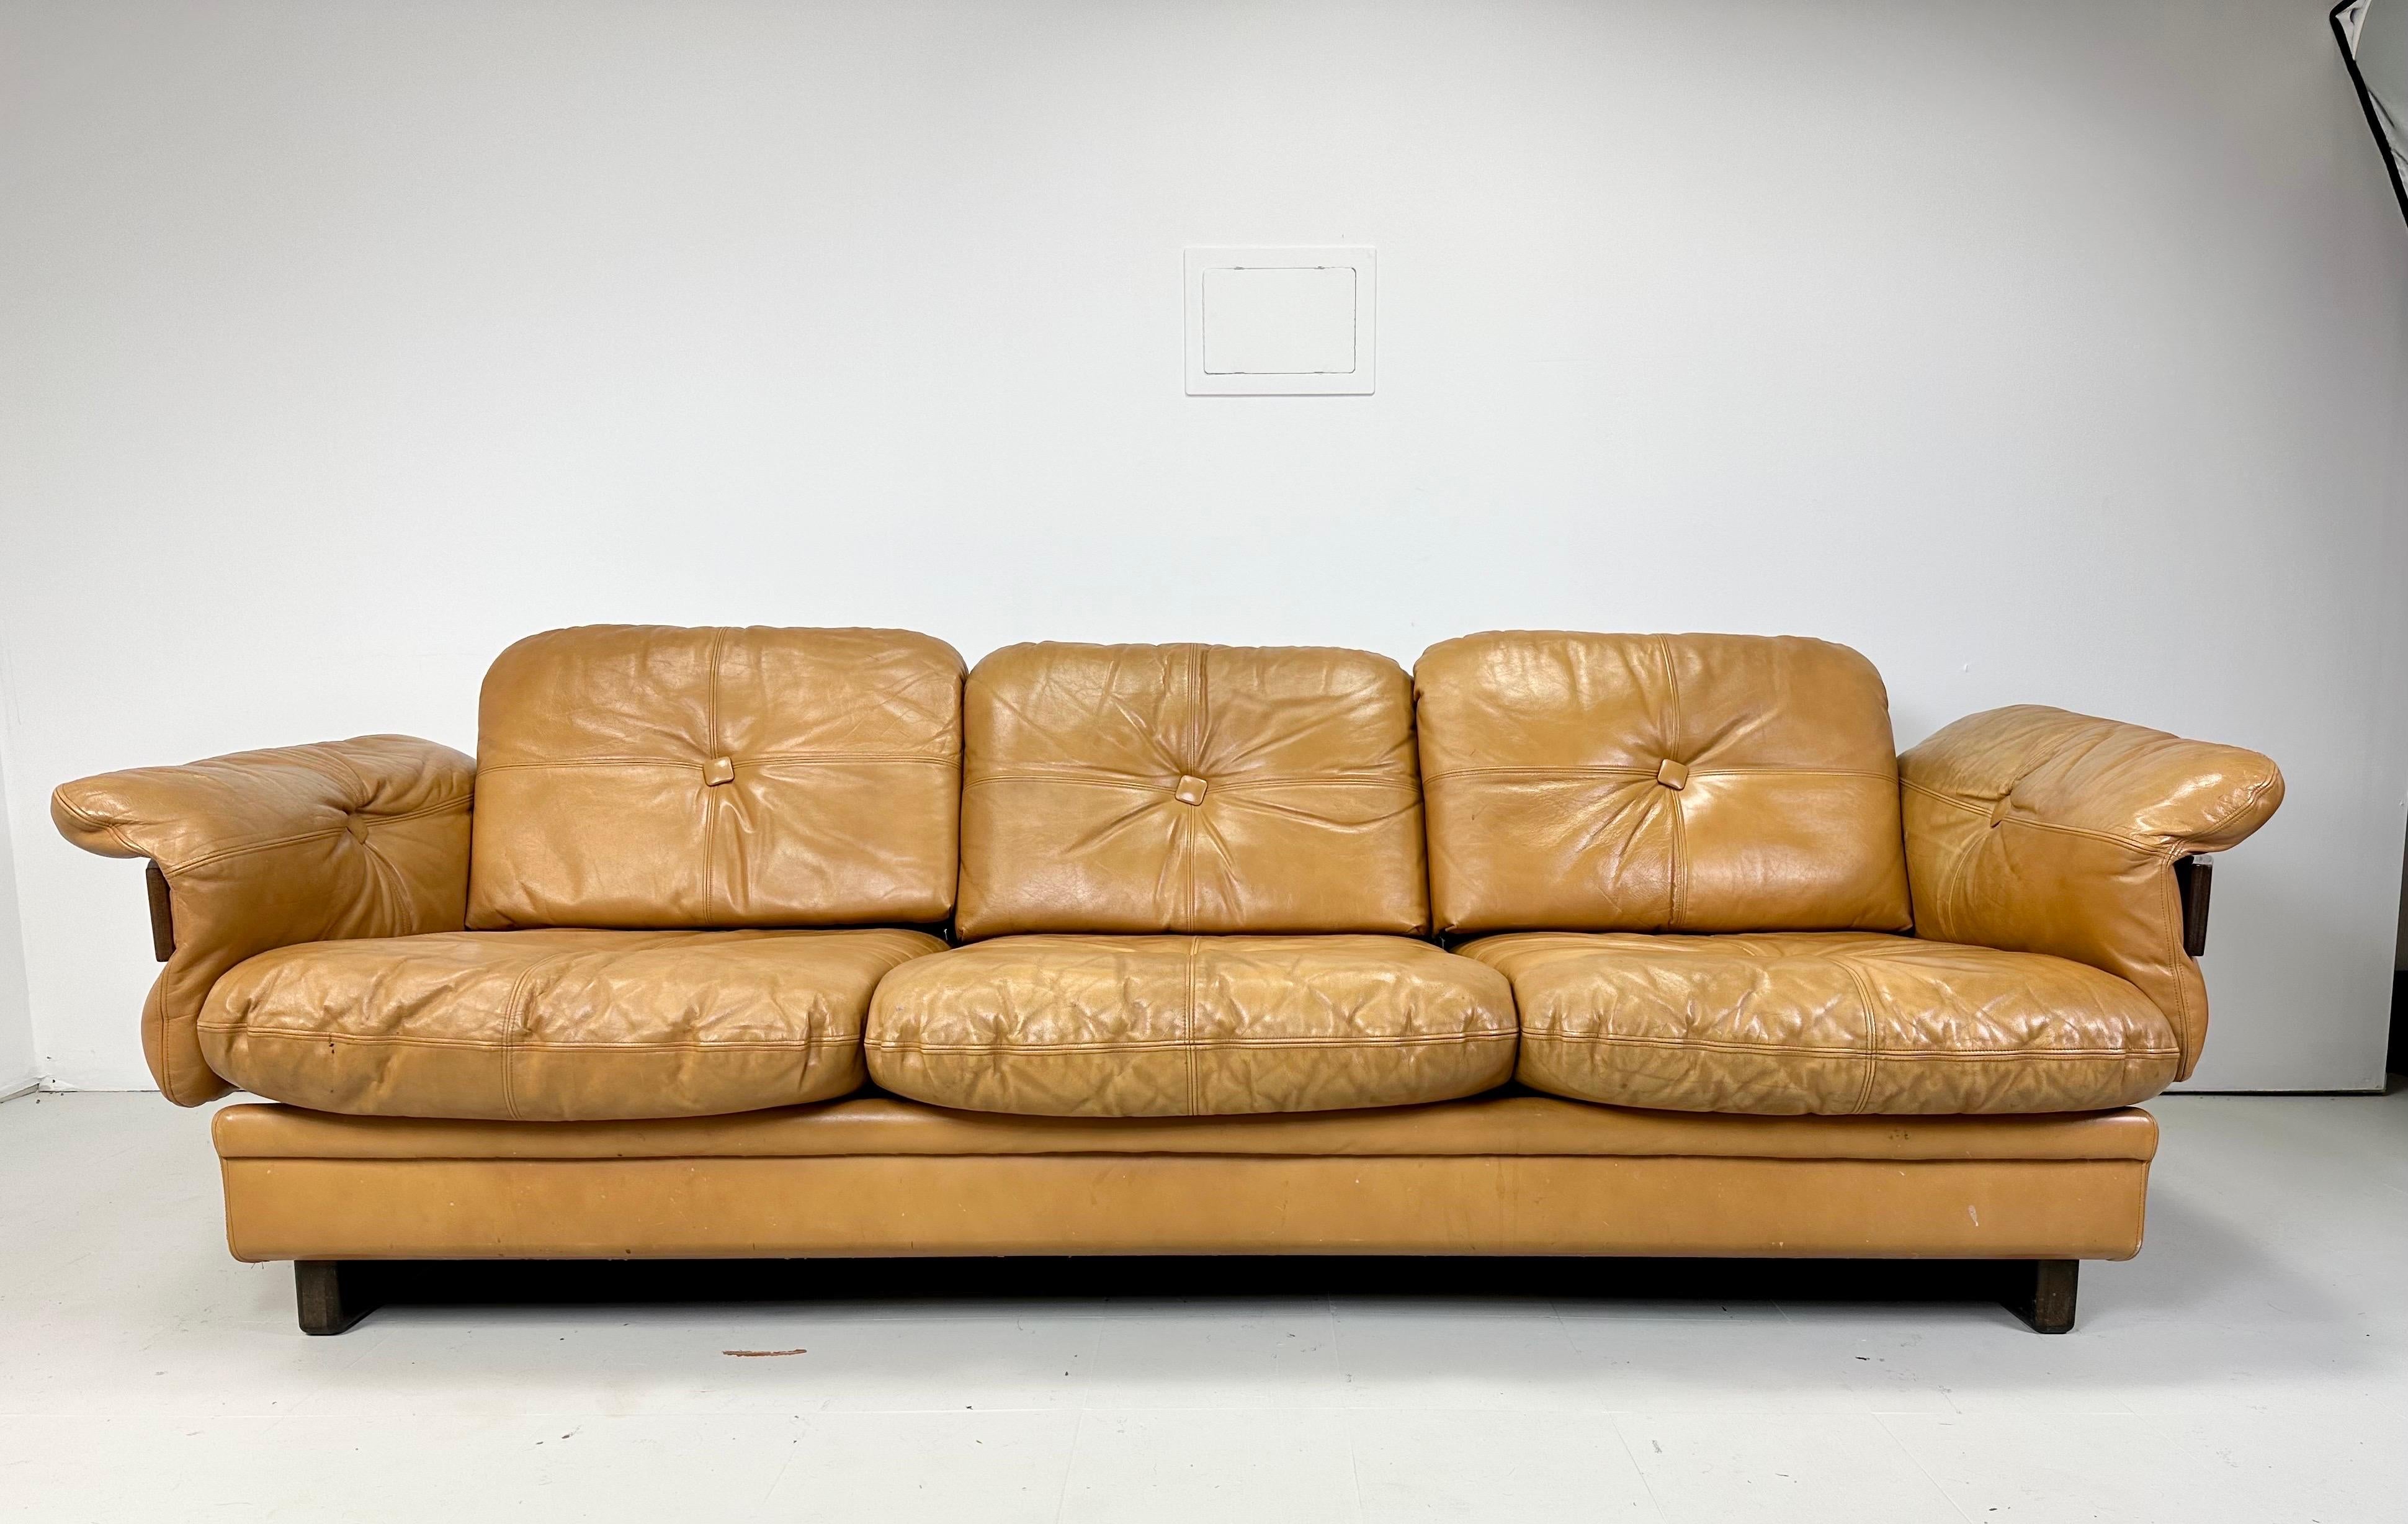 1970’s Leather Sofa. Bentwood arms with brass details. Button Cushions. Soft light Butterscotch color vintage leather. Sofa sits low and deep for lounging comfort. Matching settee available

Delivery to NYC area for $475